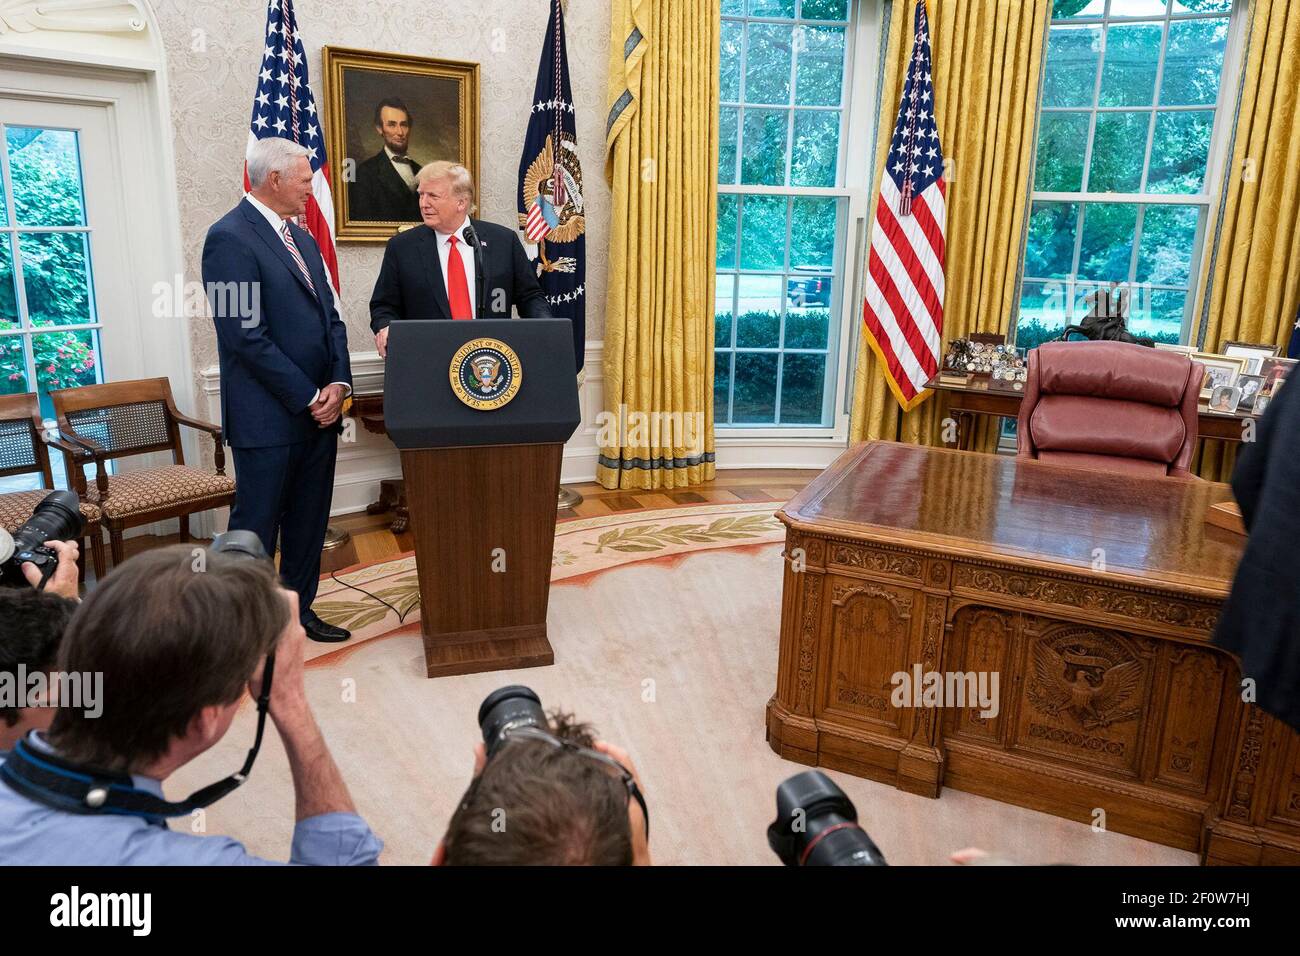 President Donald Trump delivers remarks prior to awarding the Presidential Medal of Freedom the nation's highest civilian honor to Hall of Fame Los Angeles Lakers basketball star and legendary NBA General Manager Jerry West Thursday Sept. 5 2019 in the Oval Office of the White House. Stock Photo